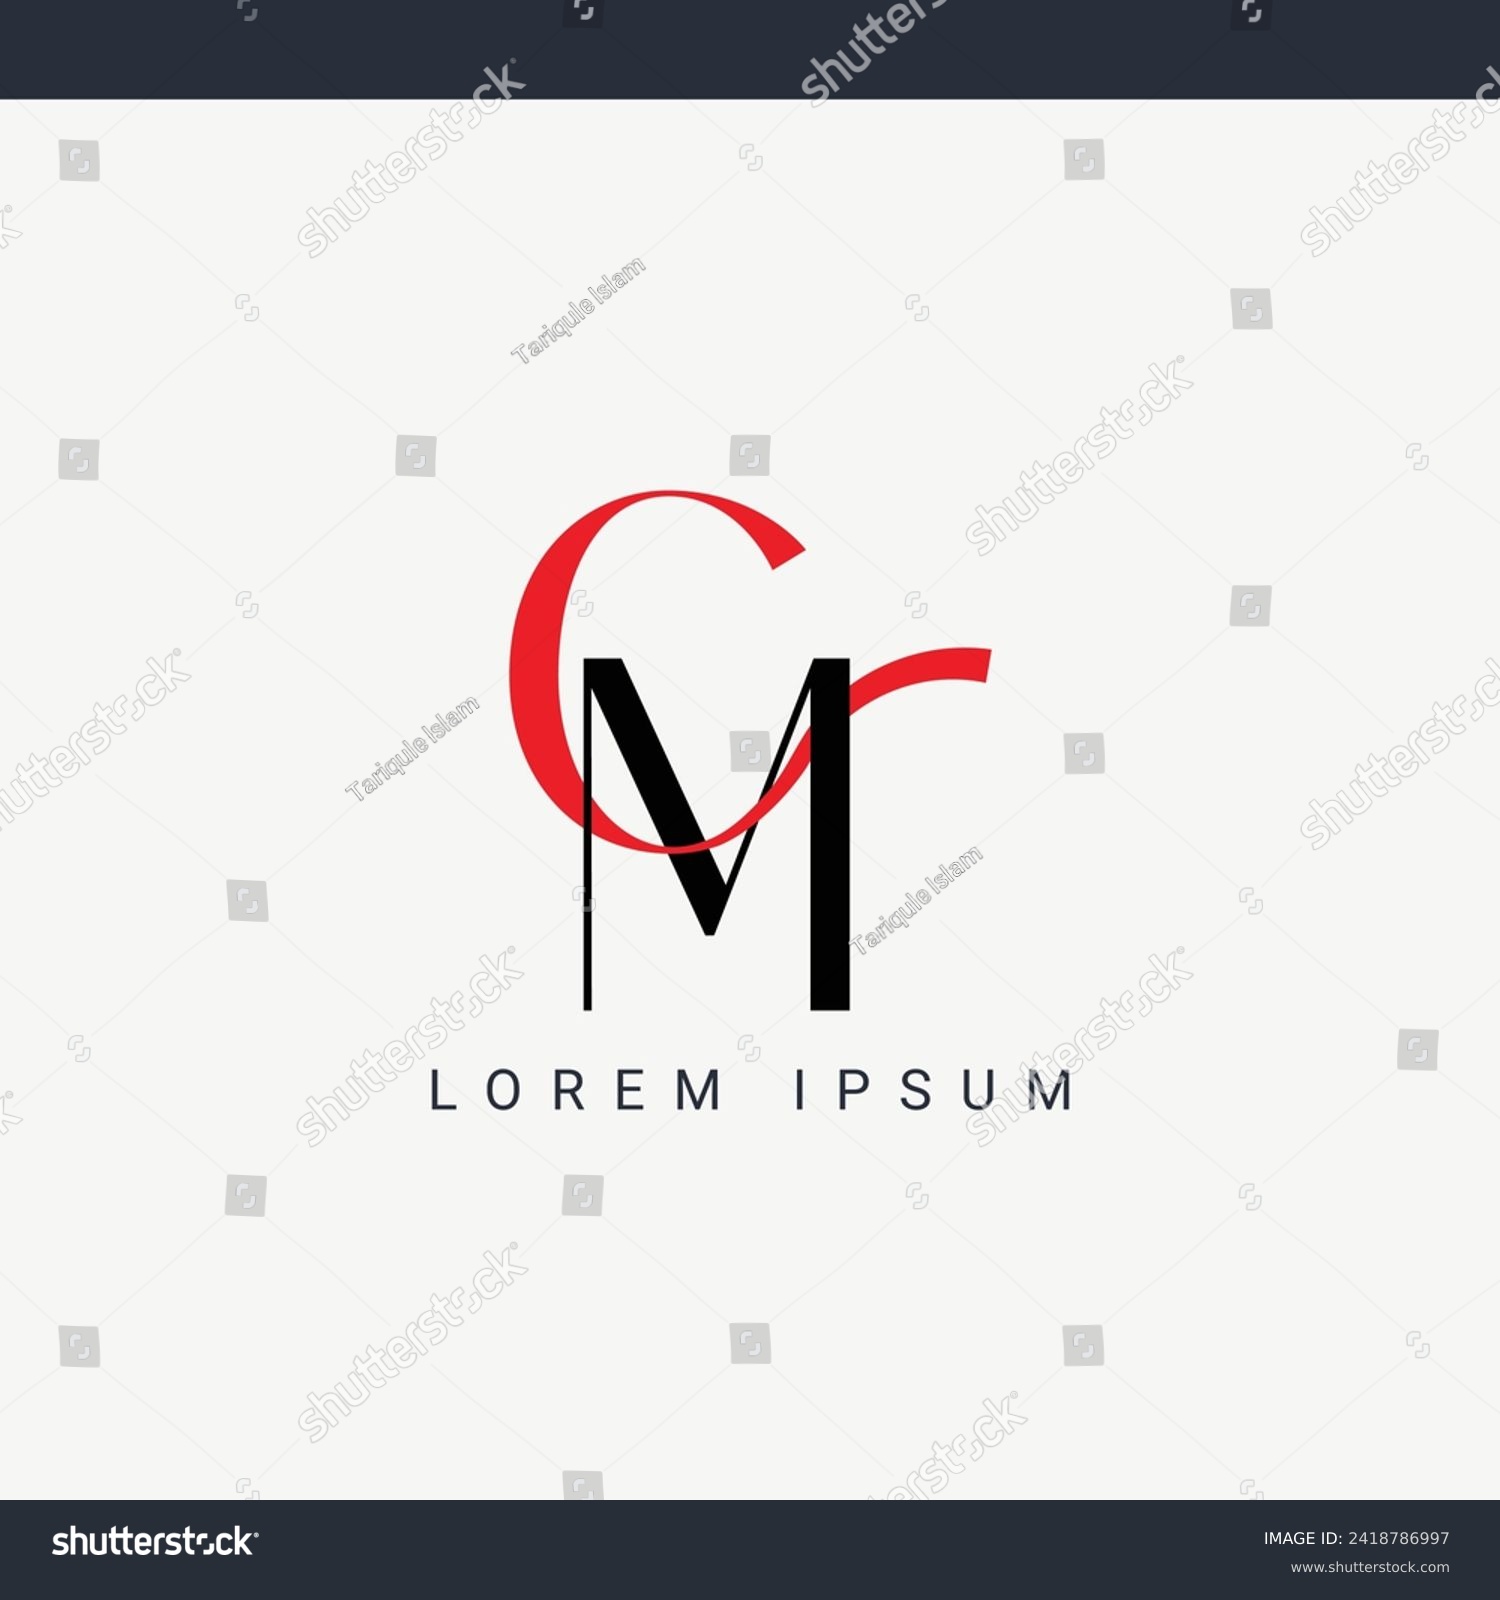 SVG of letter cm and mc logo design vector template svg